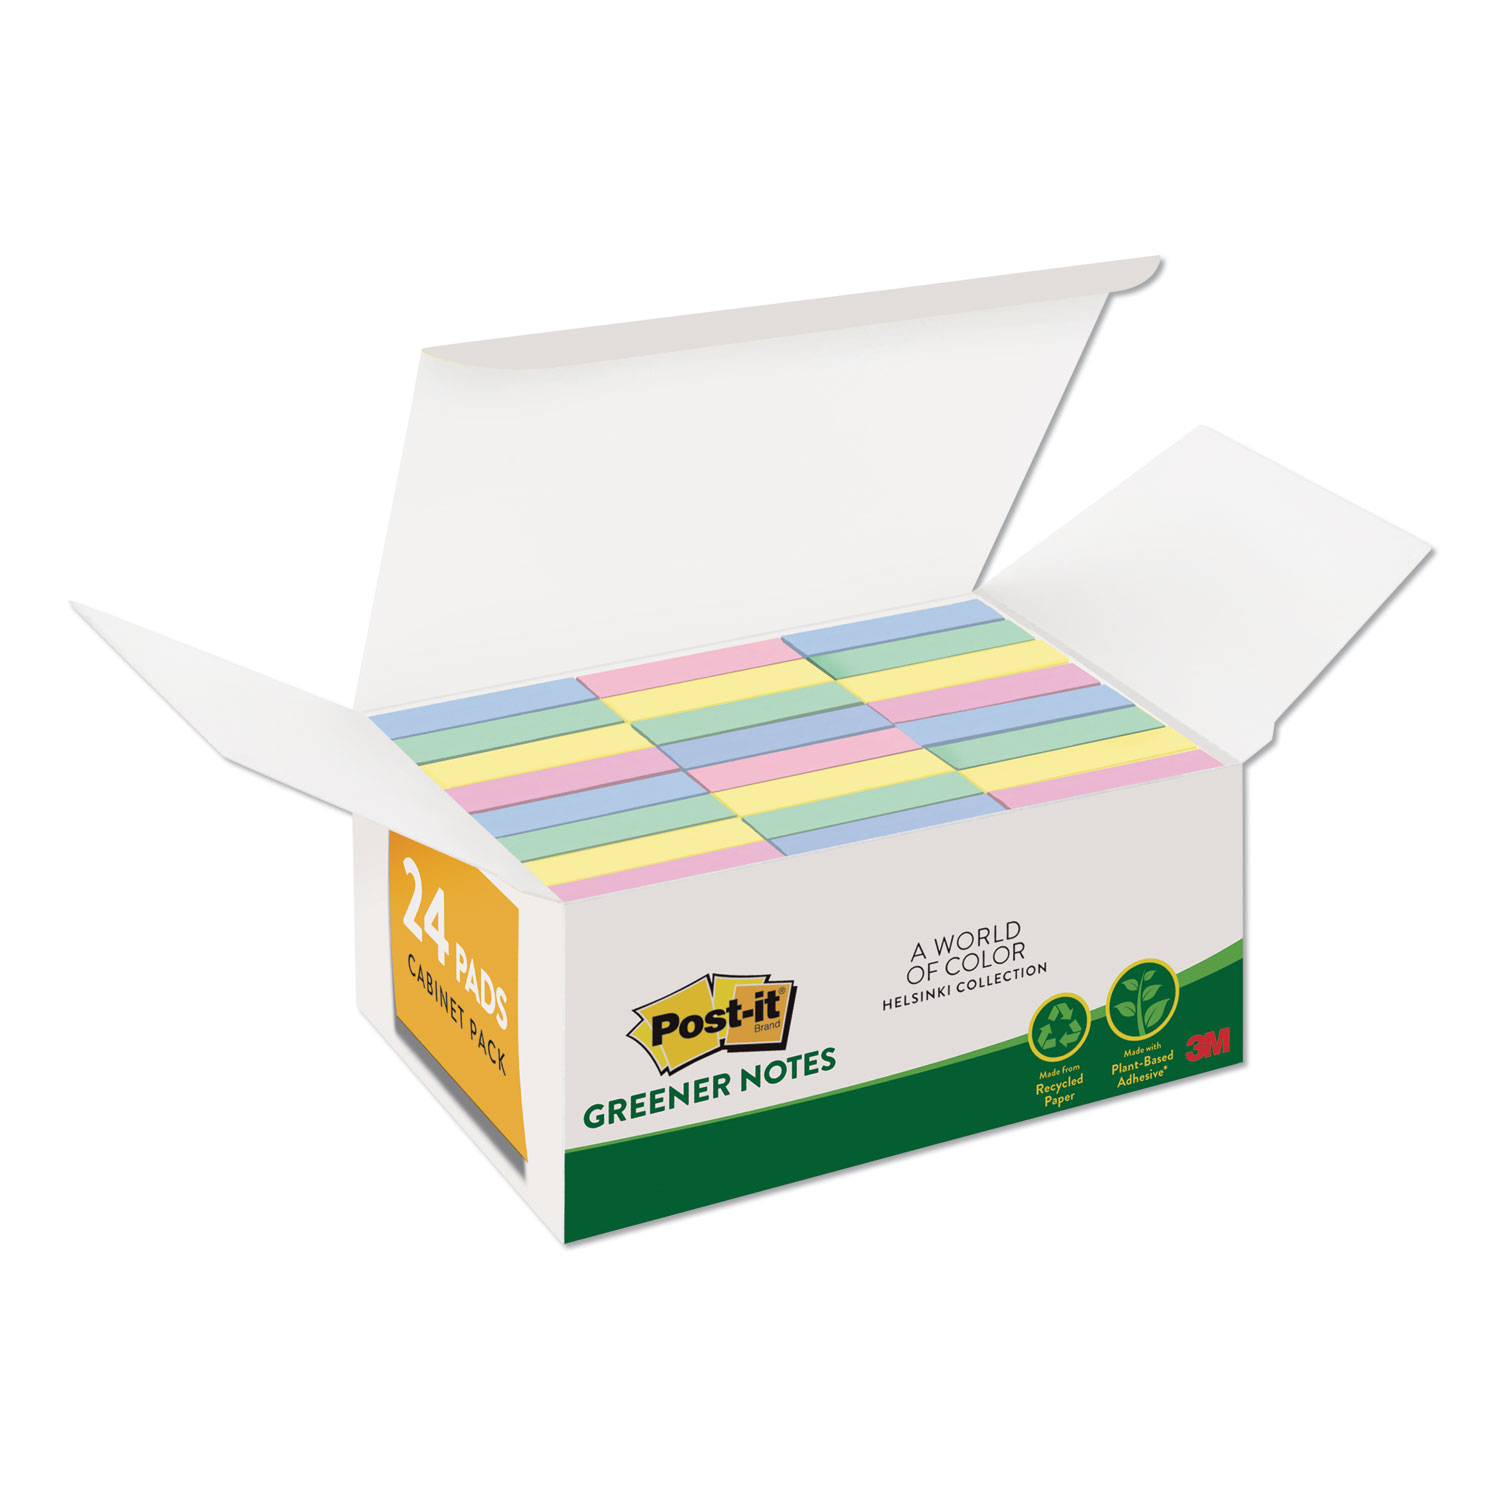  Post-it Greener Notes 65324RPVAD Recycled Note Pads, 1 3/8 x 1 7/8, Plain, Assorted Helsinki Colors, 100-Sheet, 24/Pack (MMM65324RPVAD) 